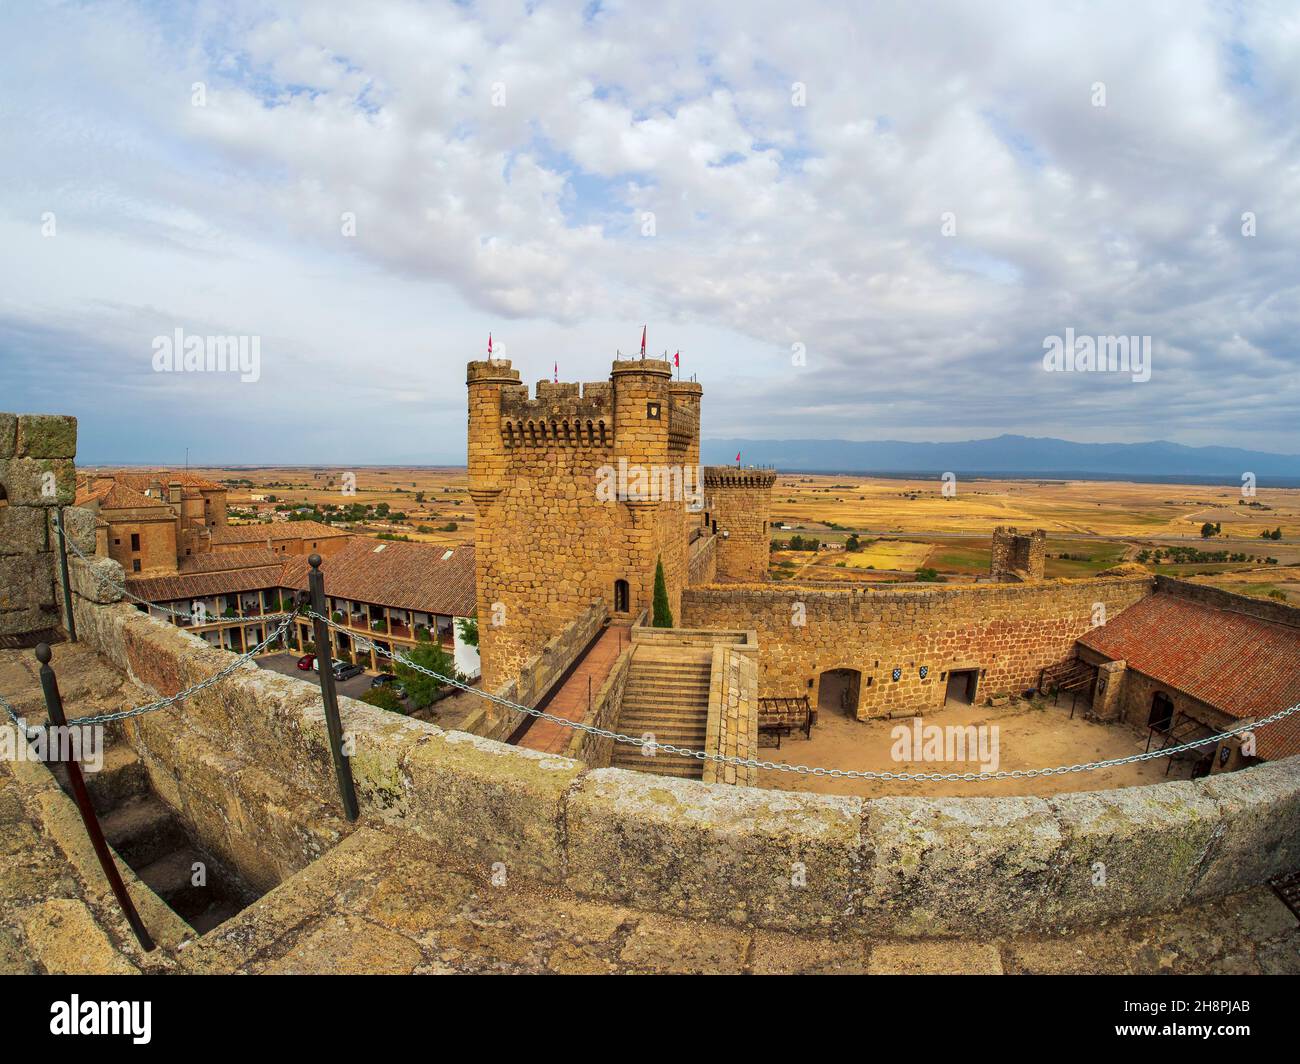 Oropesa, Toledo, Spain. 09/13/2021.   Towers and stone battlements in the medieval castle of Oropesa, in the province of Toledo. Stock Photo